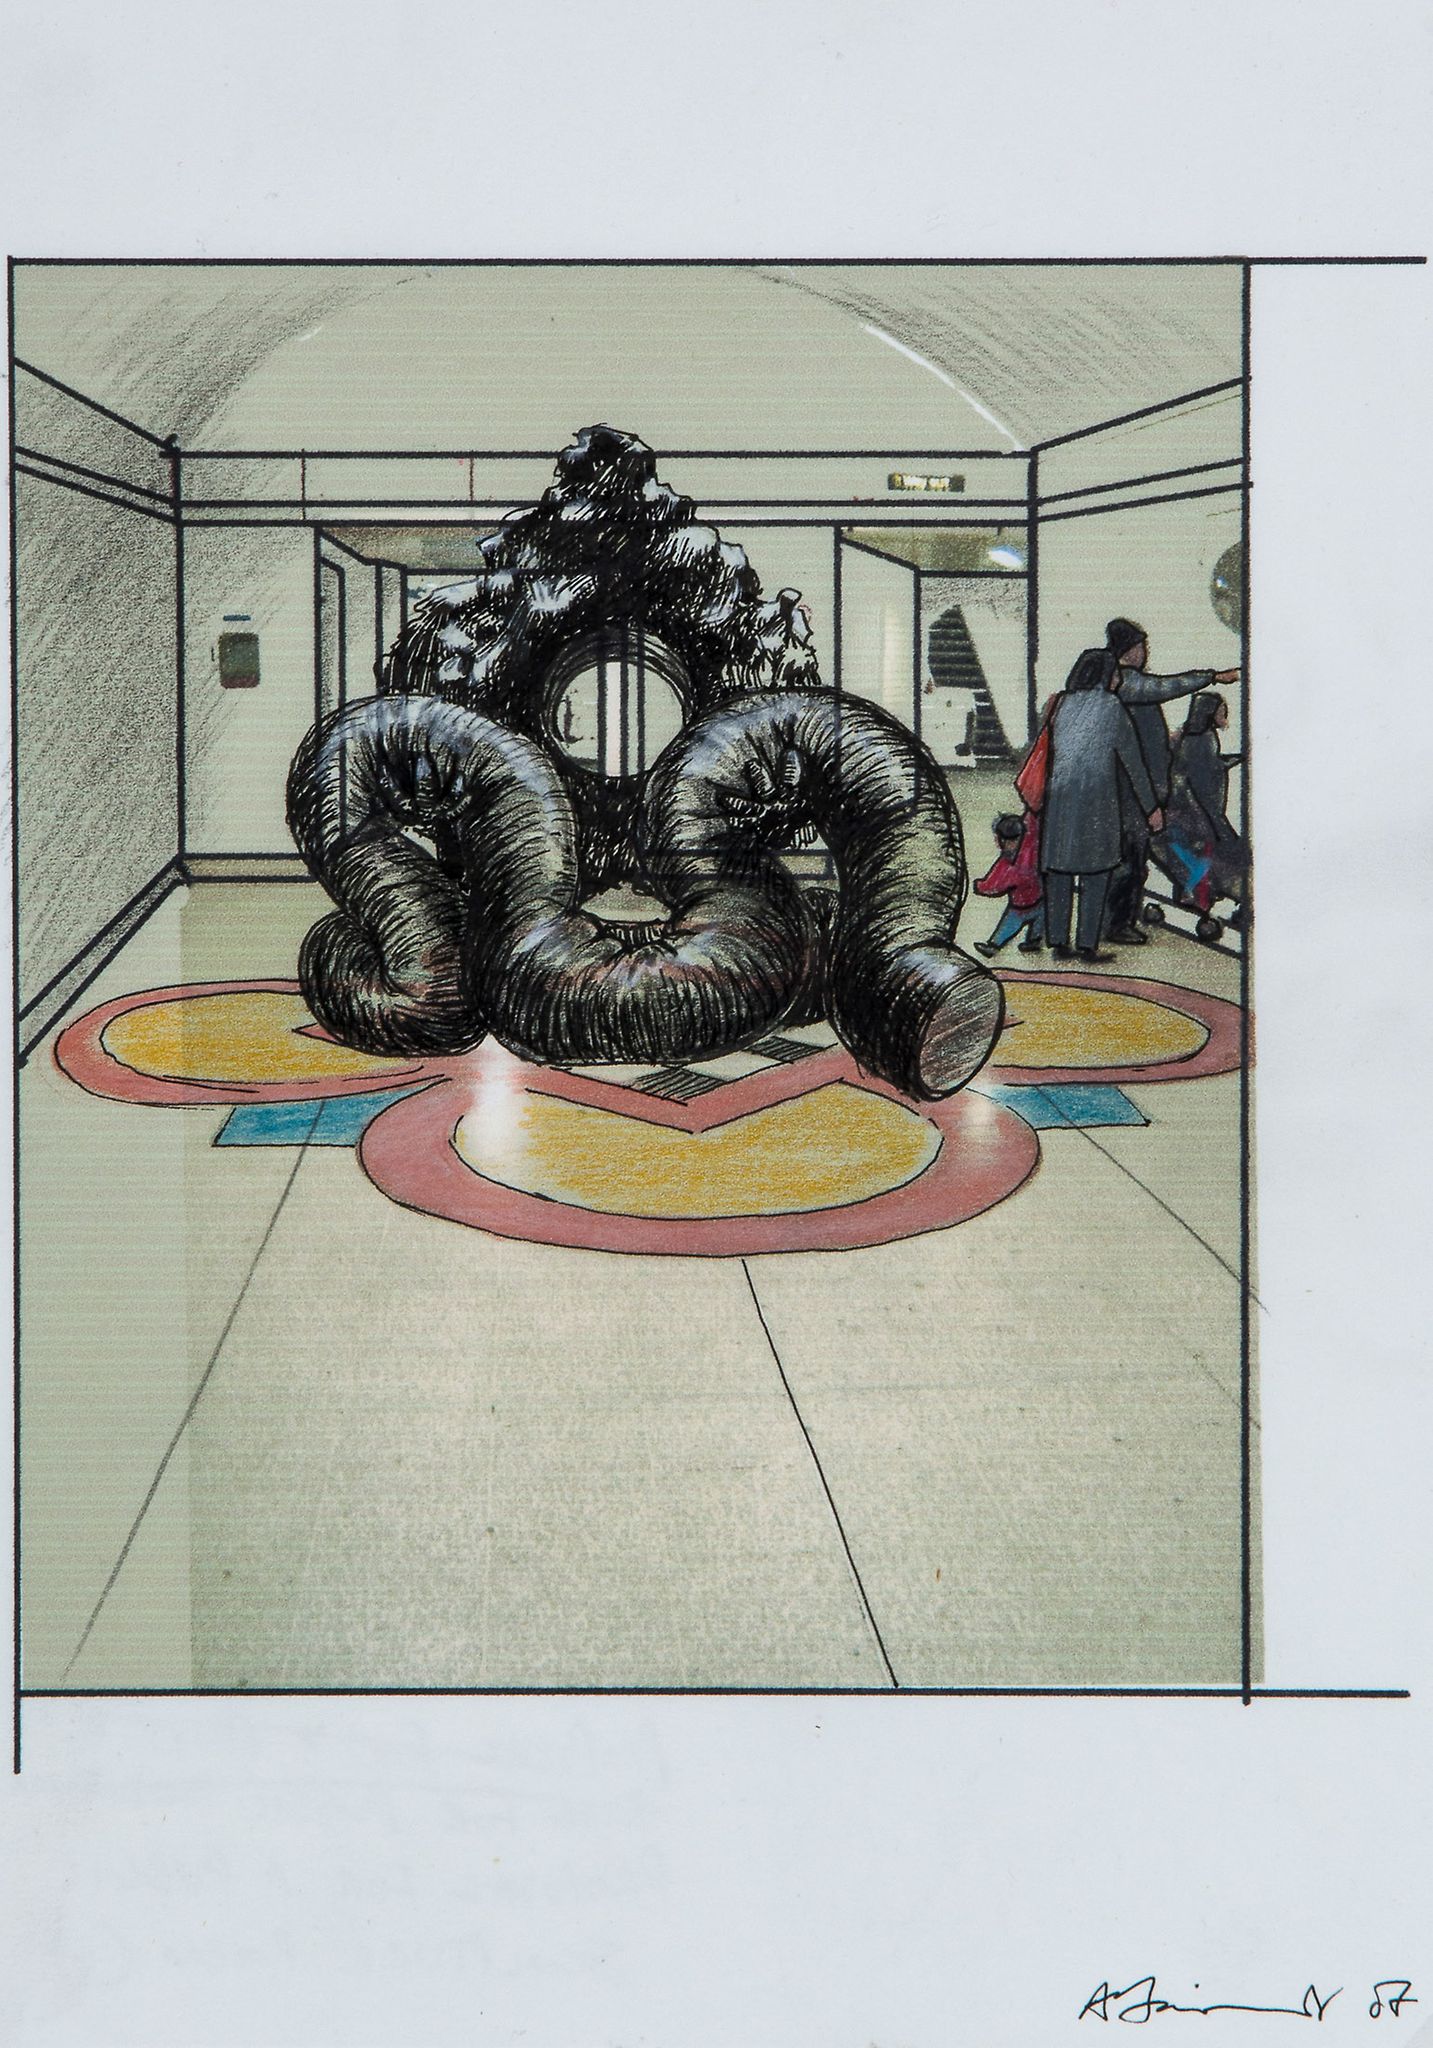 Angus Fairhurst (1966-2008) - Proposal for a Public Sculpture Room giclee in colours with